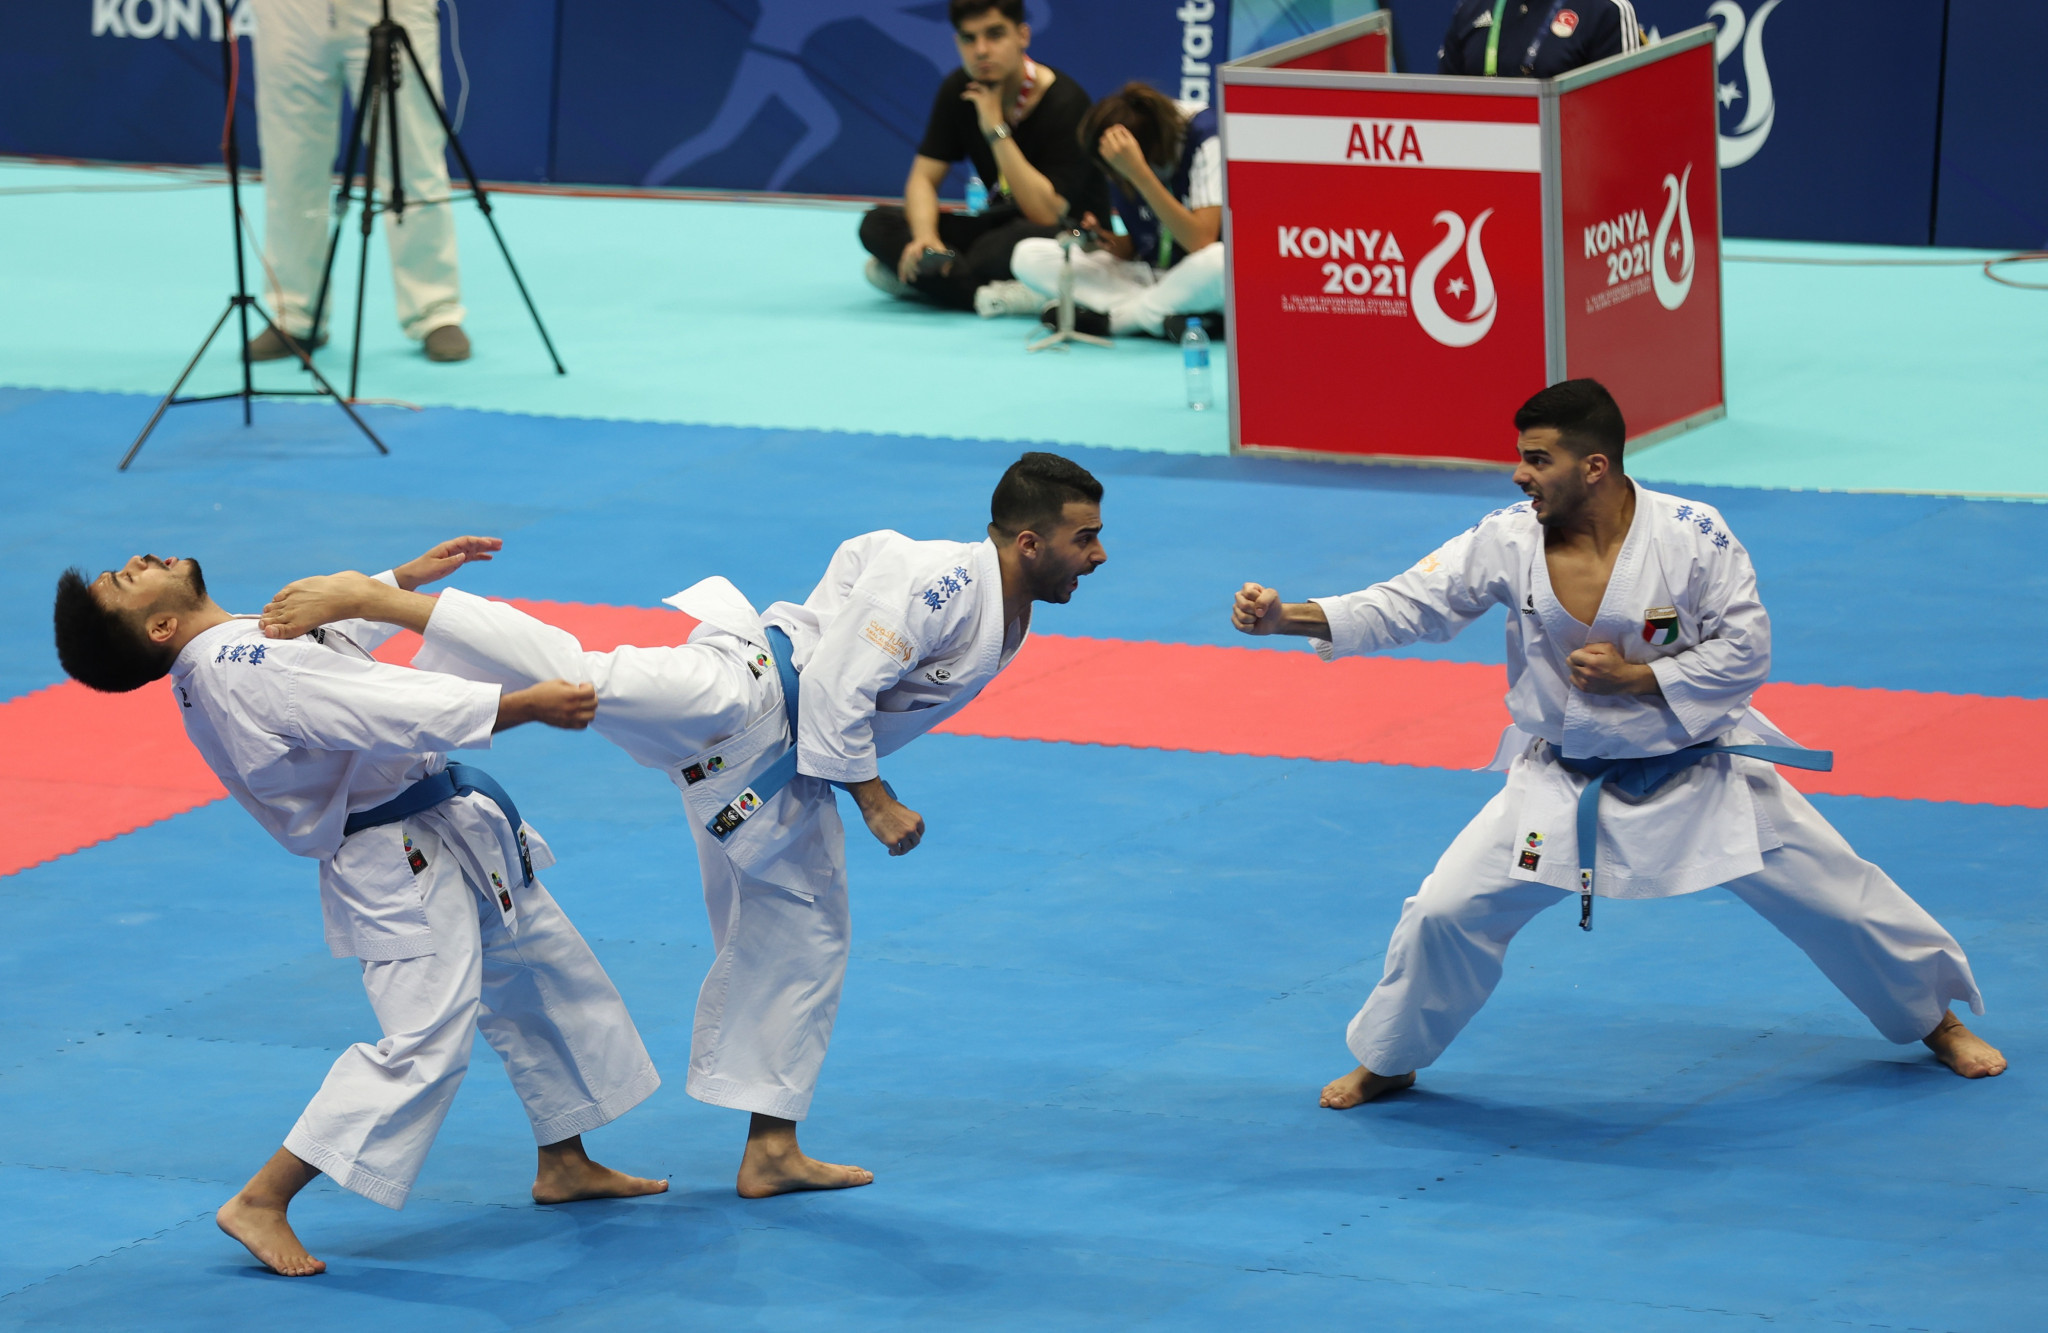 The pair discussed the upcoming World Cadet, Junior and Under-21 Championships in Konya which hosted the Islamic Solidarity Games earlier this year ©Konya 2021